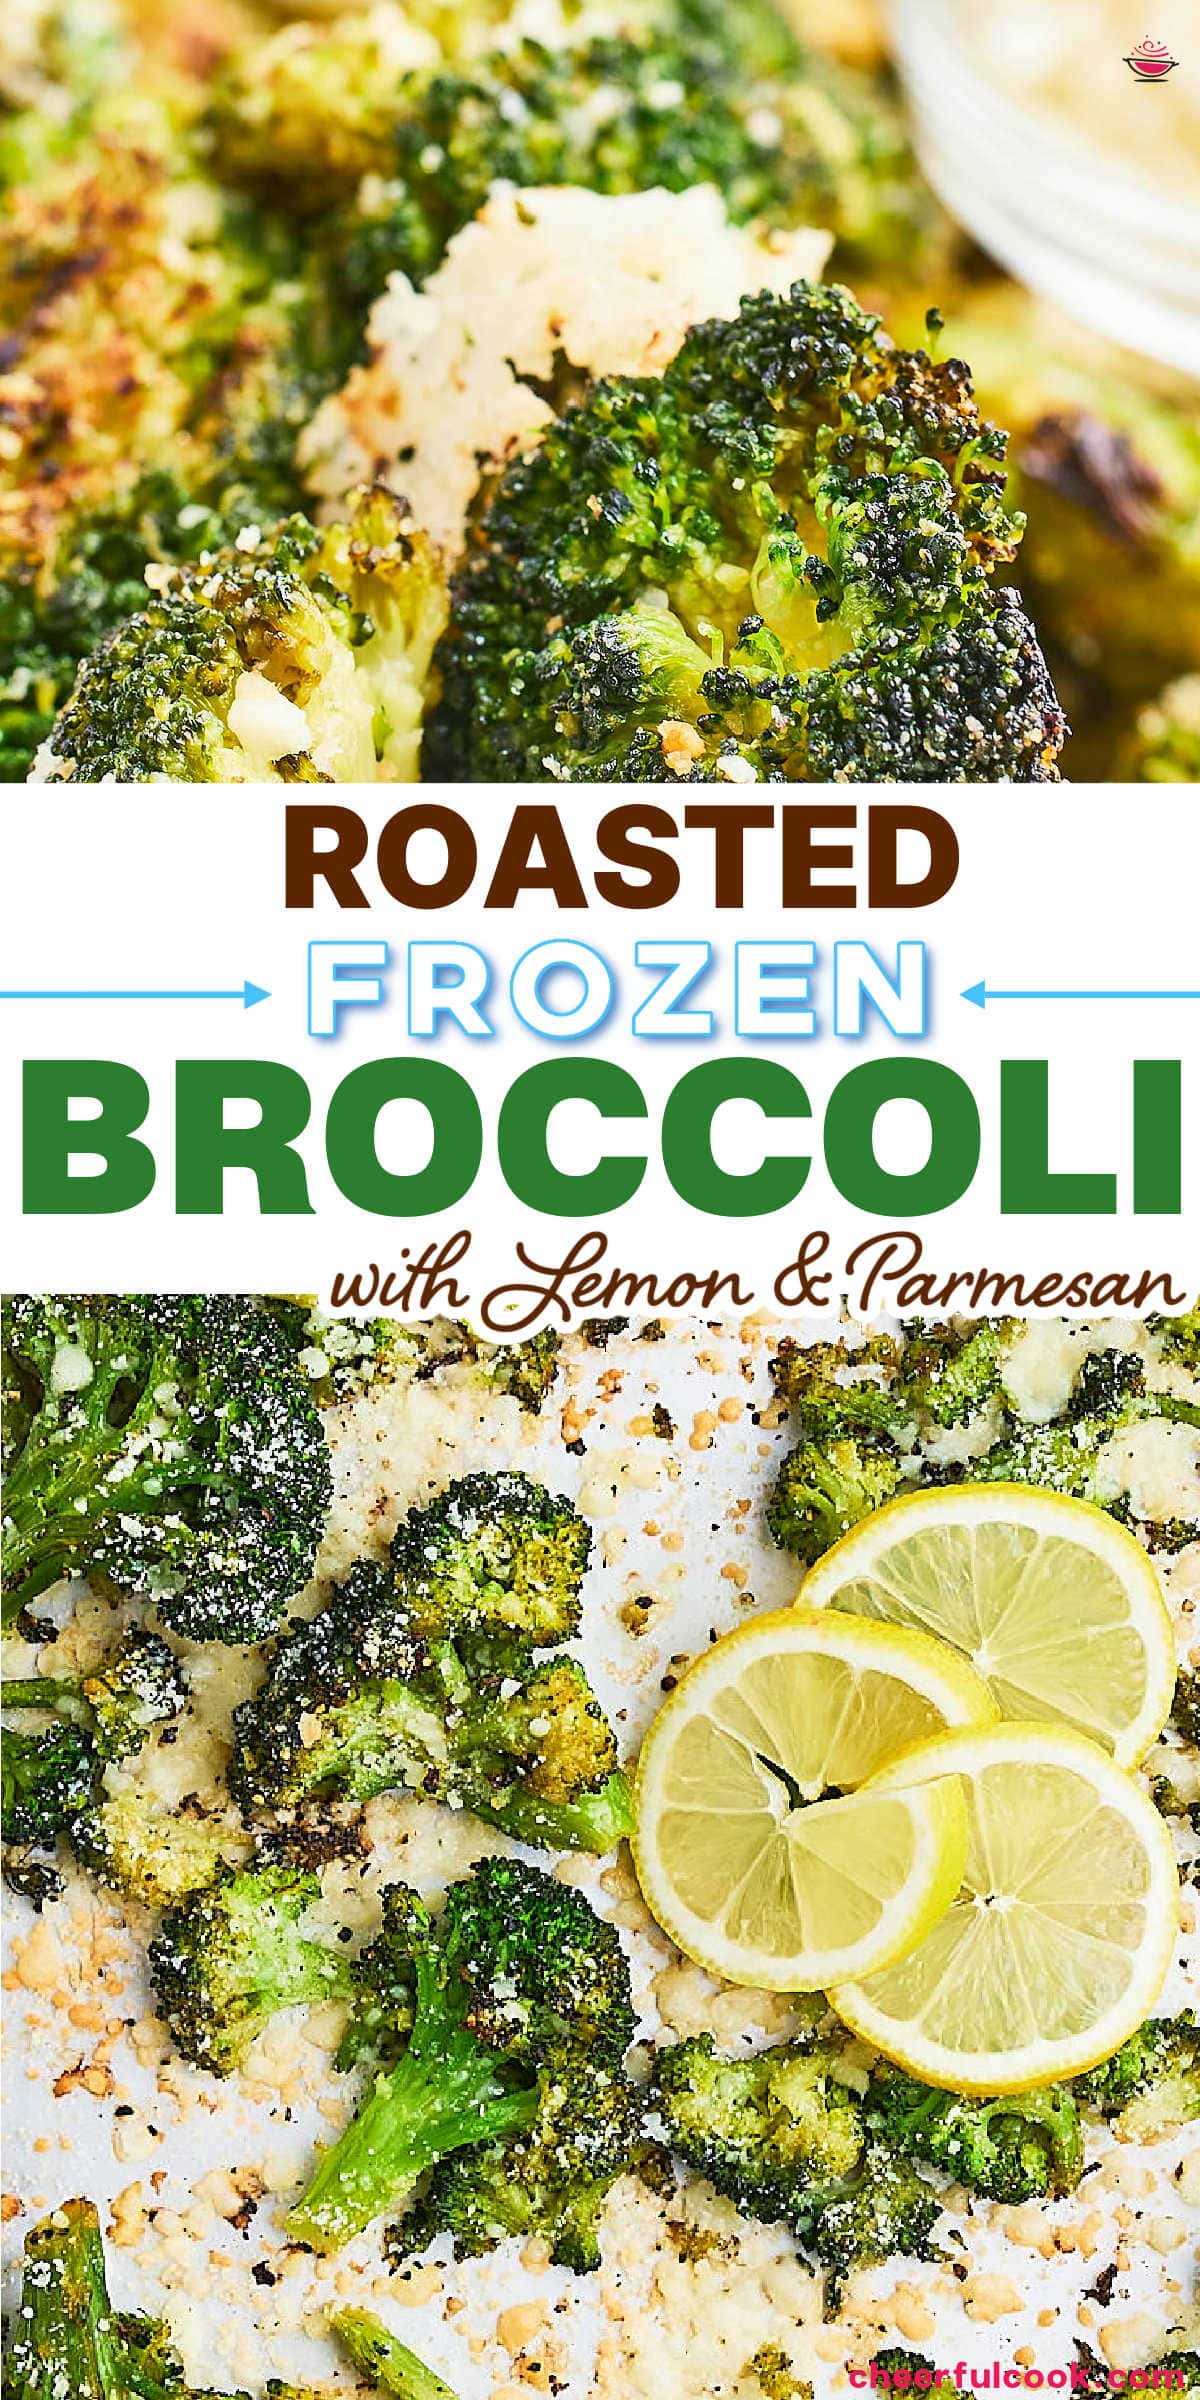 Transform frozen broccoli into a crispy, flavorful side dish with this quick and easy recipe. Perfectly roasted with olive oil, garlic, and onion, then finished with fresh lemon and Parmesan cheese, it's sure to become a family favorite! #cheerfulcook #VeggieSideDish #BroccoliRecipe #RoastedVeggies #SideDishEasy #frozenbroccoli #dinner #sidedish via @cheerfulcook